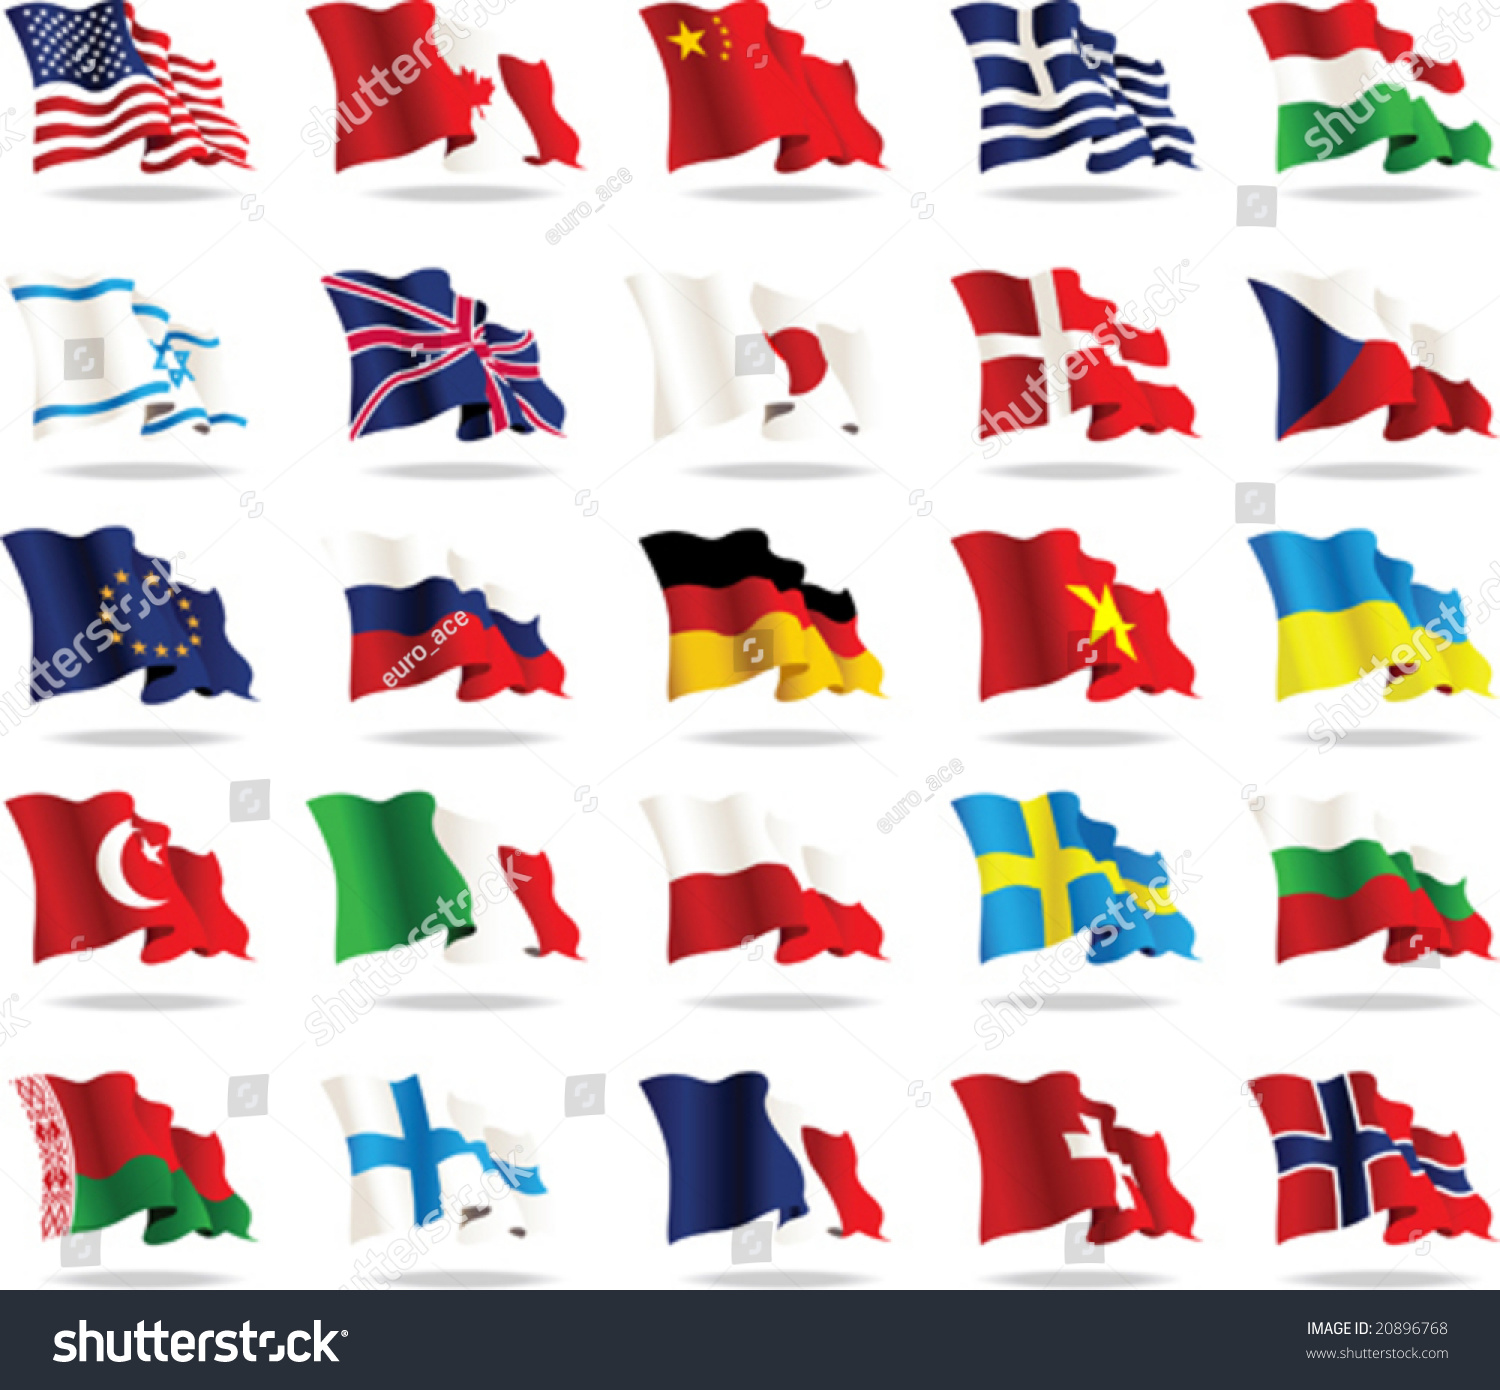 world cup flags clipart - photo #43